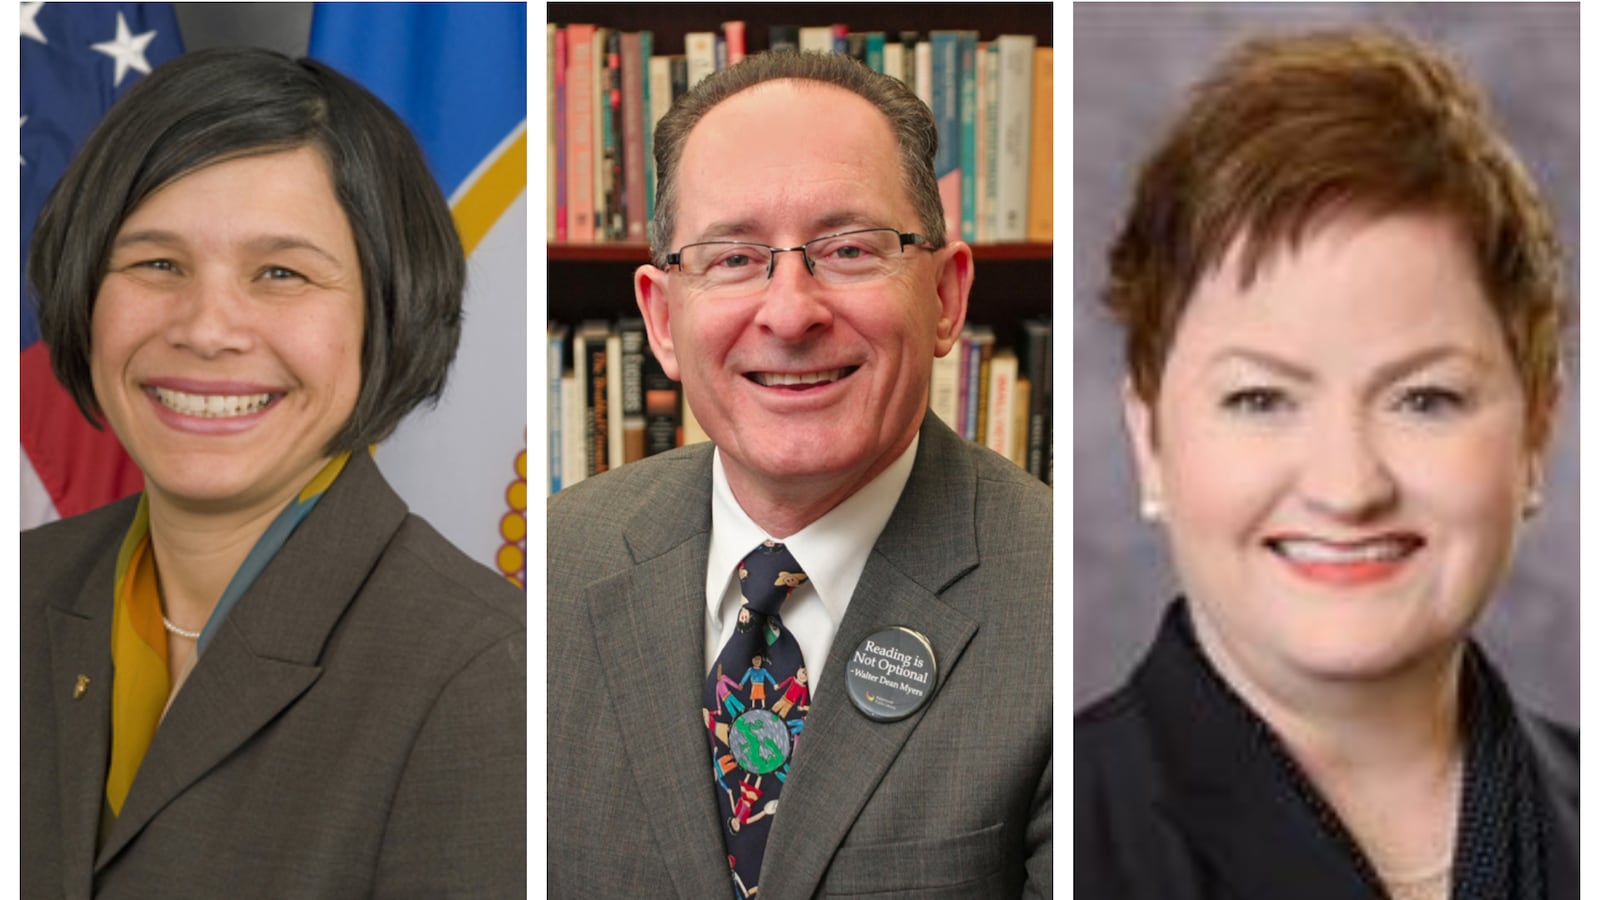 Finalists for the state superintendent's job in Michigan are, from left, Brenda Cassellius, Michael Rice, and Jeanice Swift